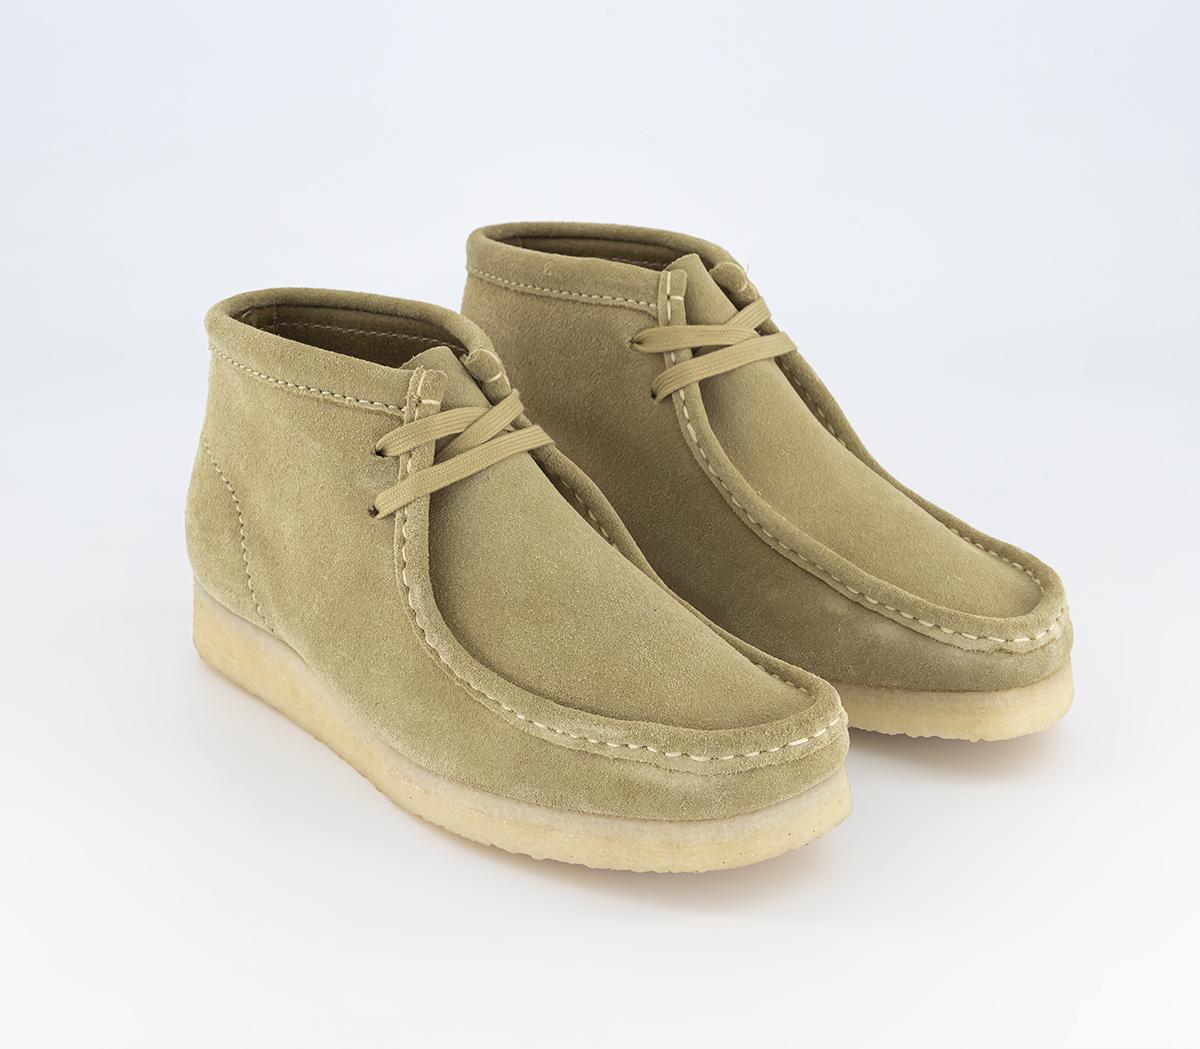 Clarks Originals Womens Wallabee Boot Maple Suede Natural, 8